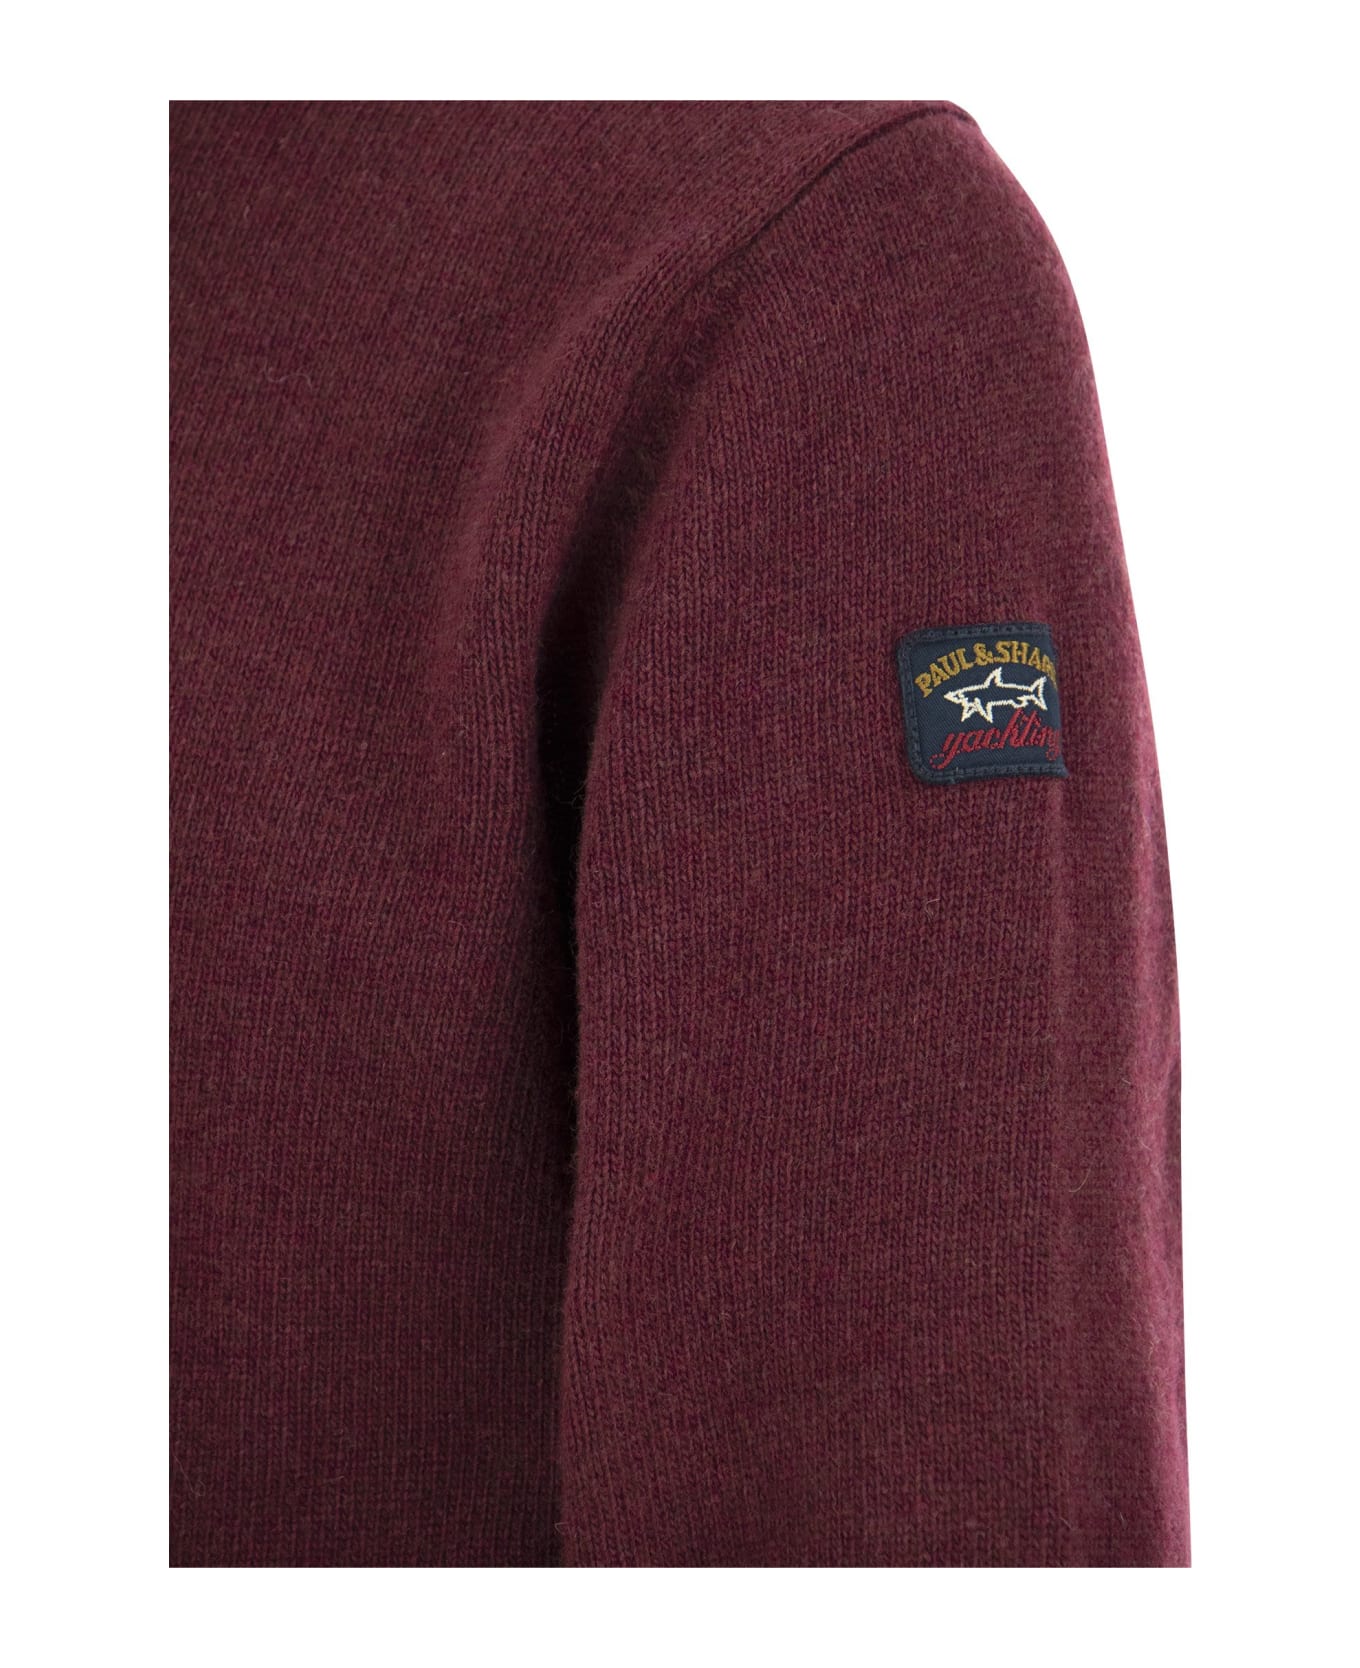 Paul&Shark Wool Crew Neck With Arm Patch Sweater - BORDEAUX